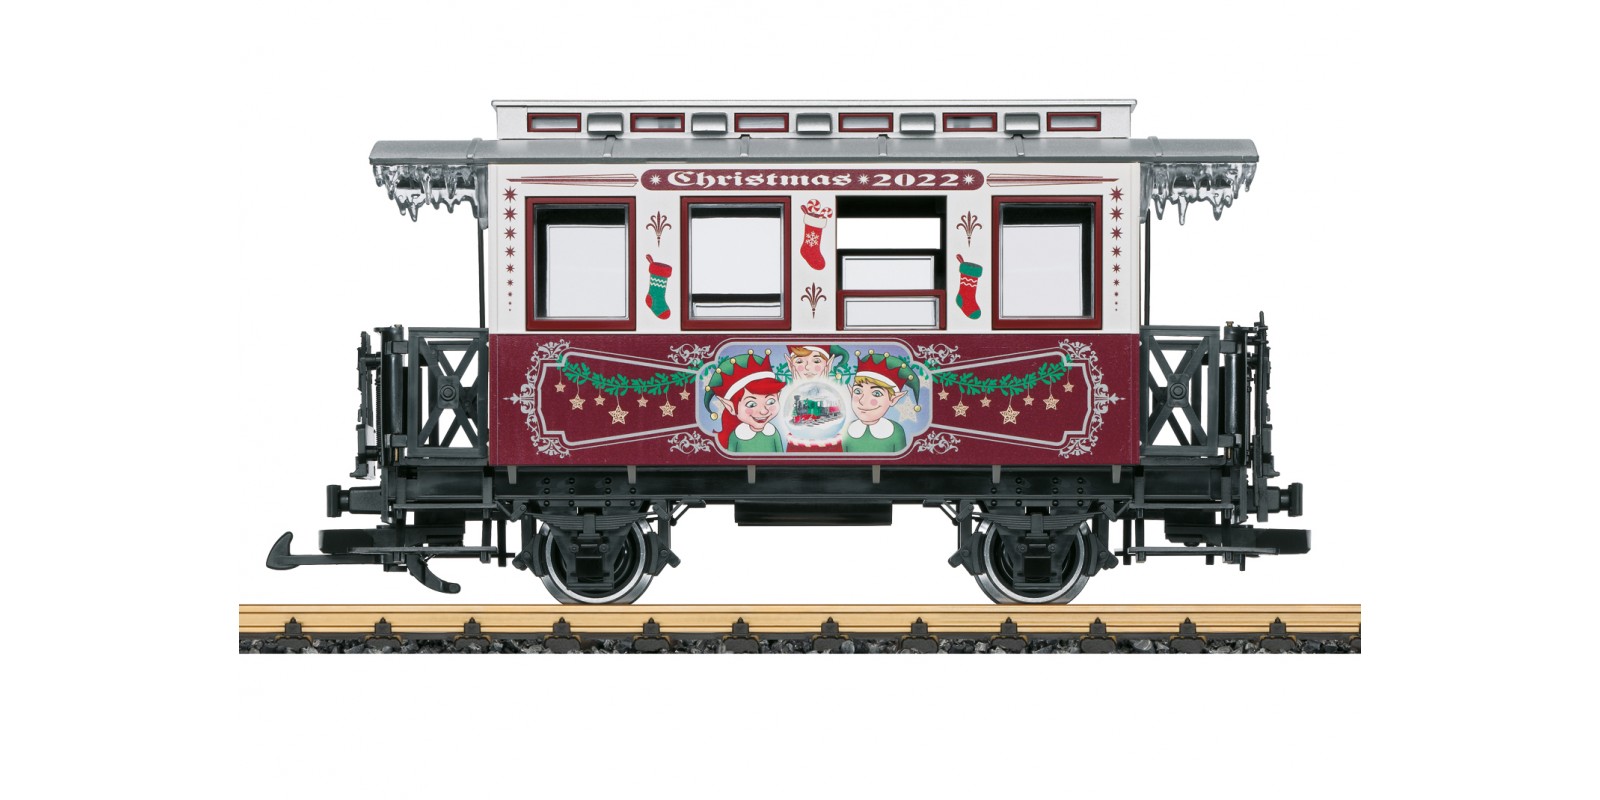 L36022 Christmas Car for 2022